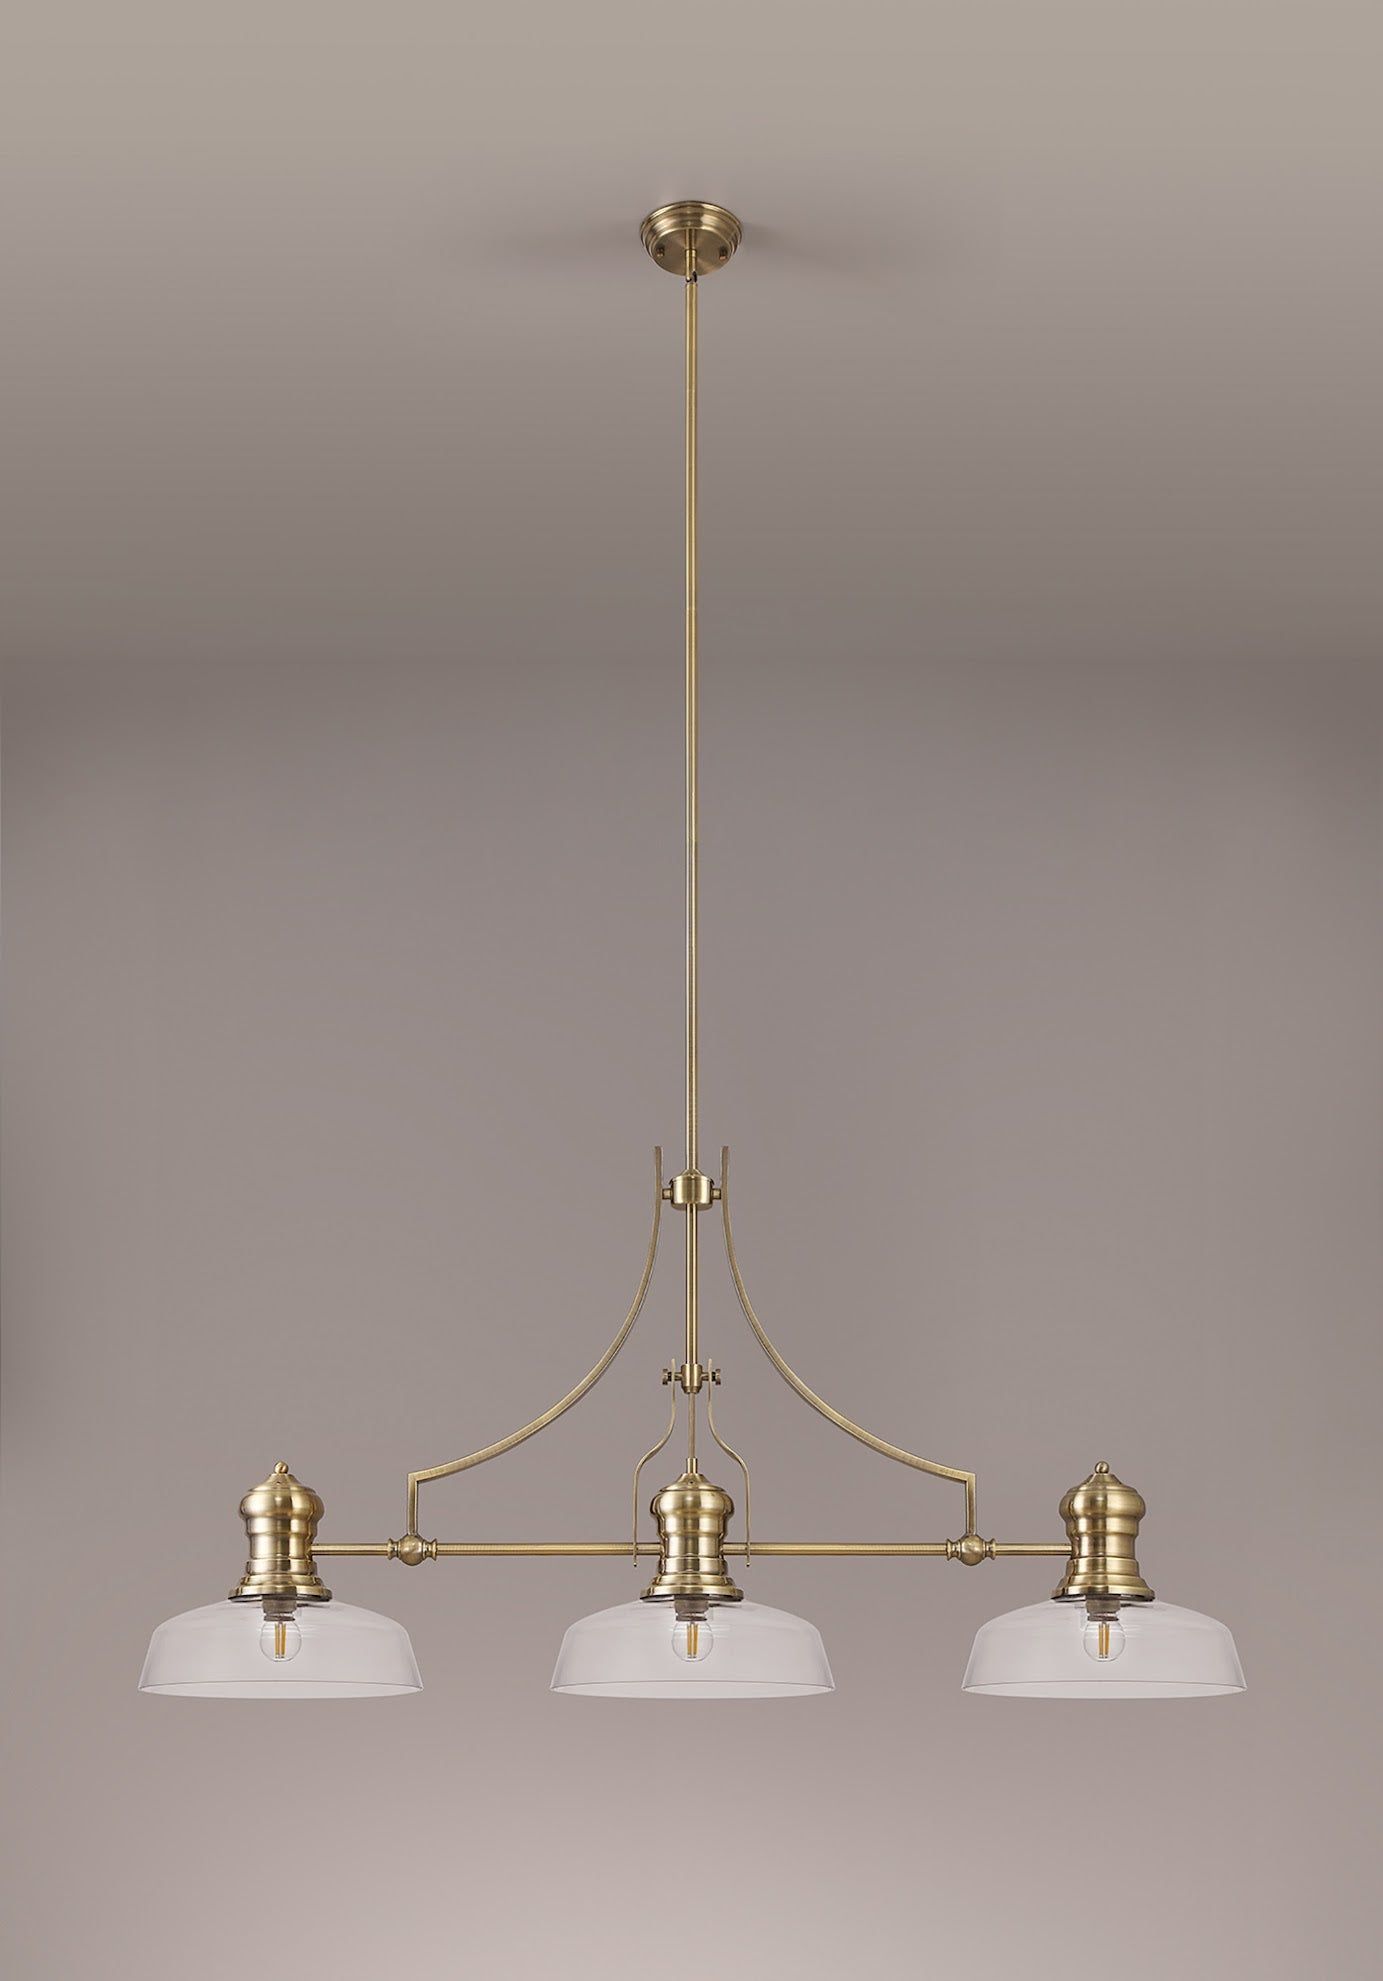 Savannah 3 Light Linear Pendant E27 With 30cm Flat Round Glass Shade, Antique Brass, Clear